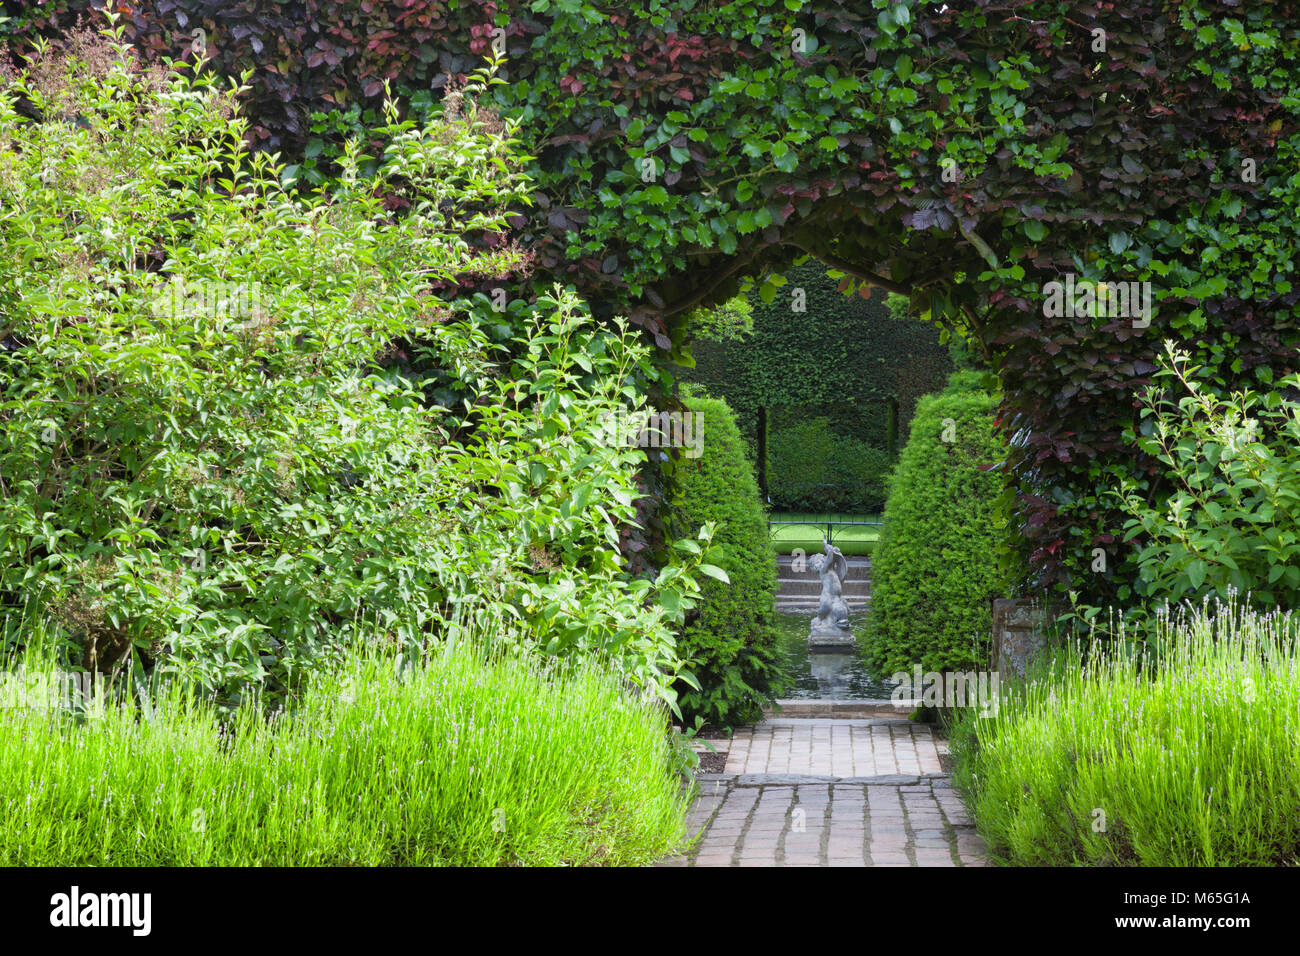 Arch in a trimmed hedge through flowering lavender leading to a pond with a water ornamental stone statue, in a lush summer garden . Stock Photo